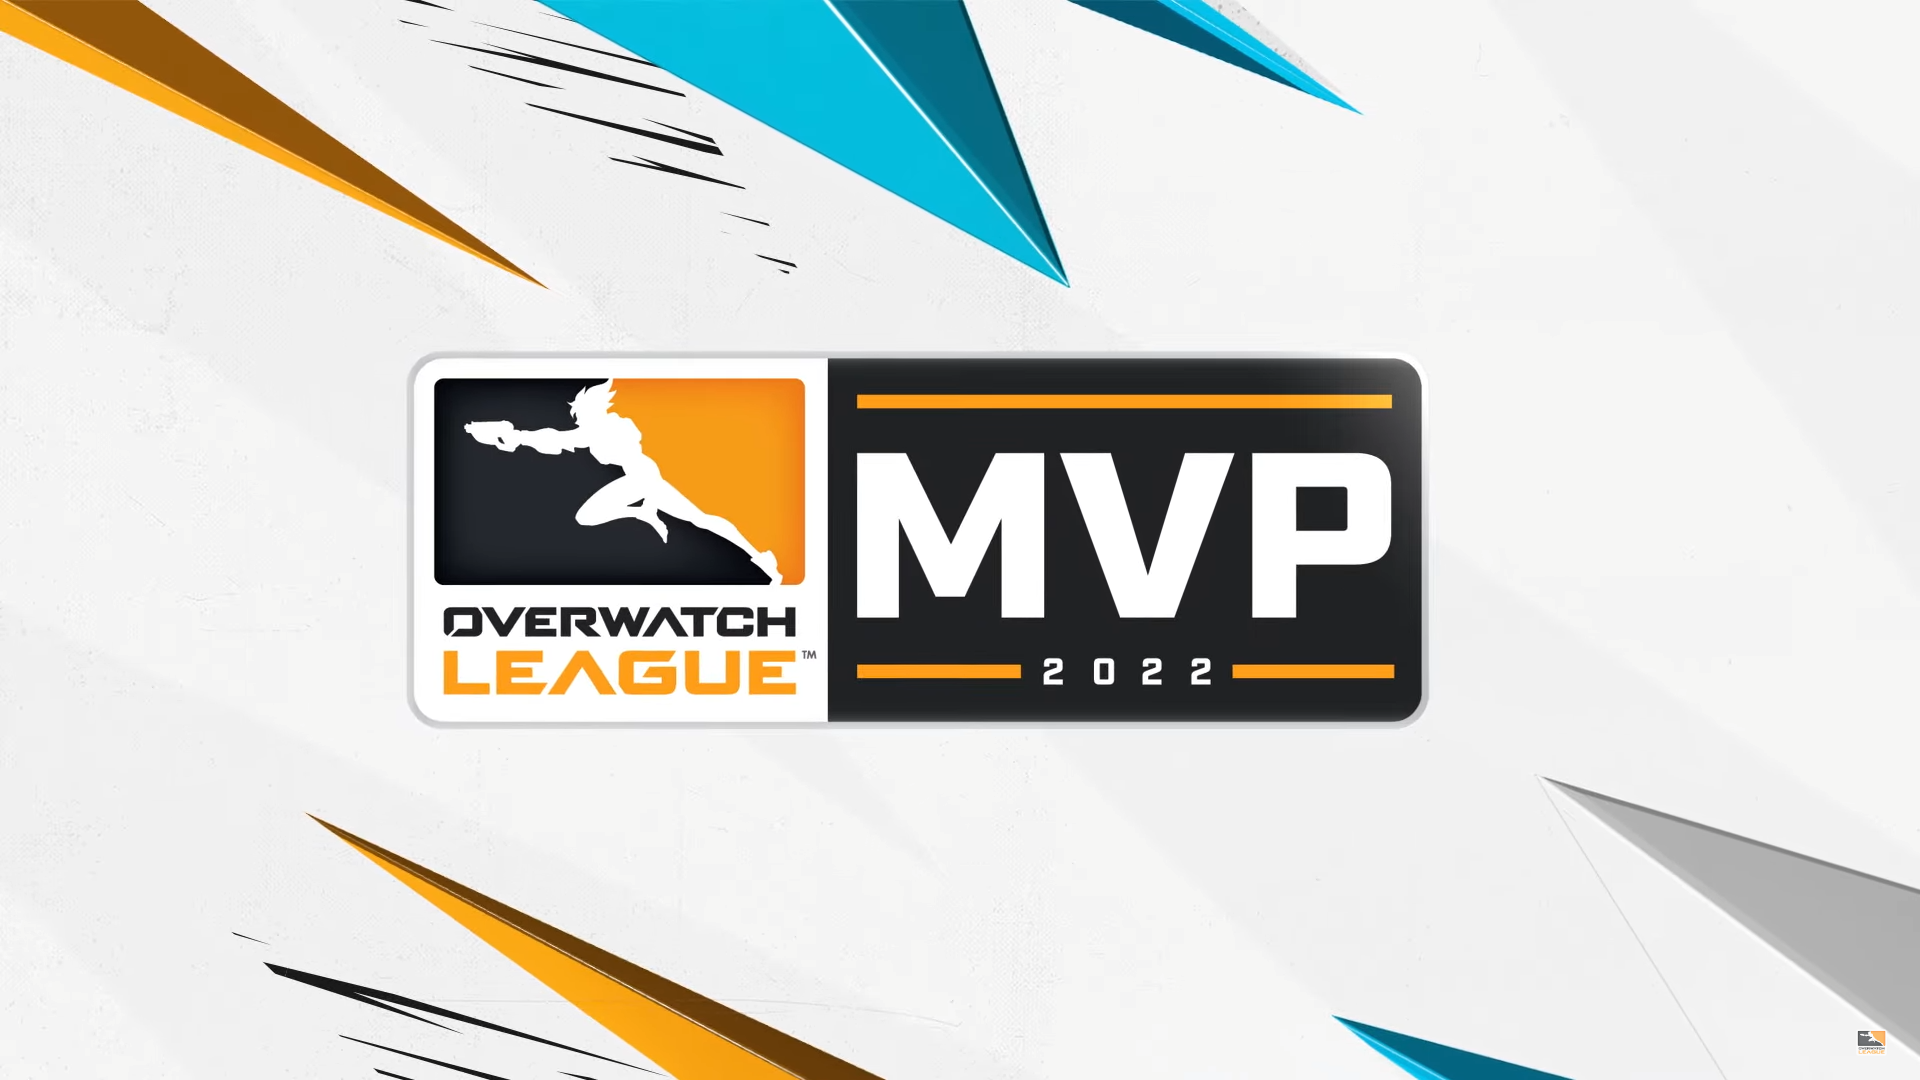 Fans can now vote for the 10 Overwatch League MVP nominees